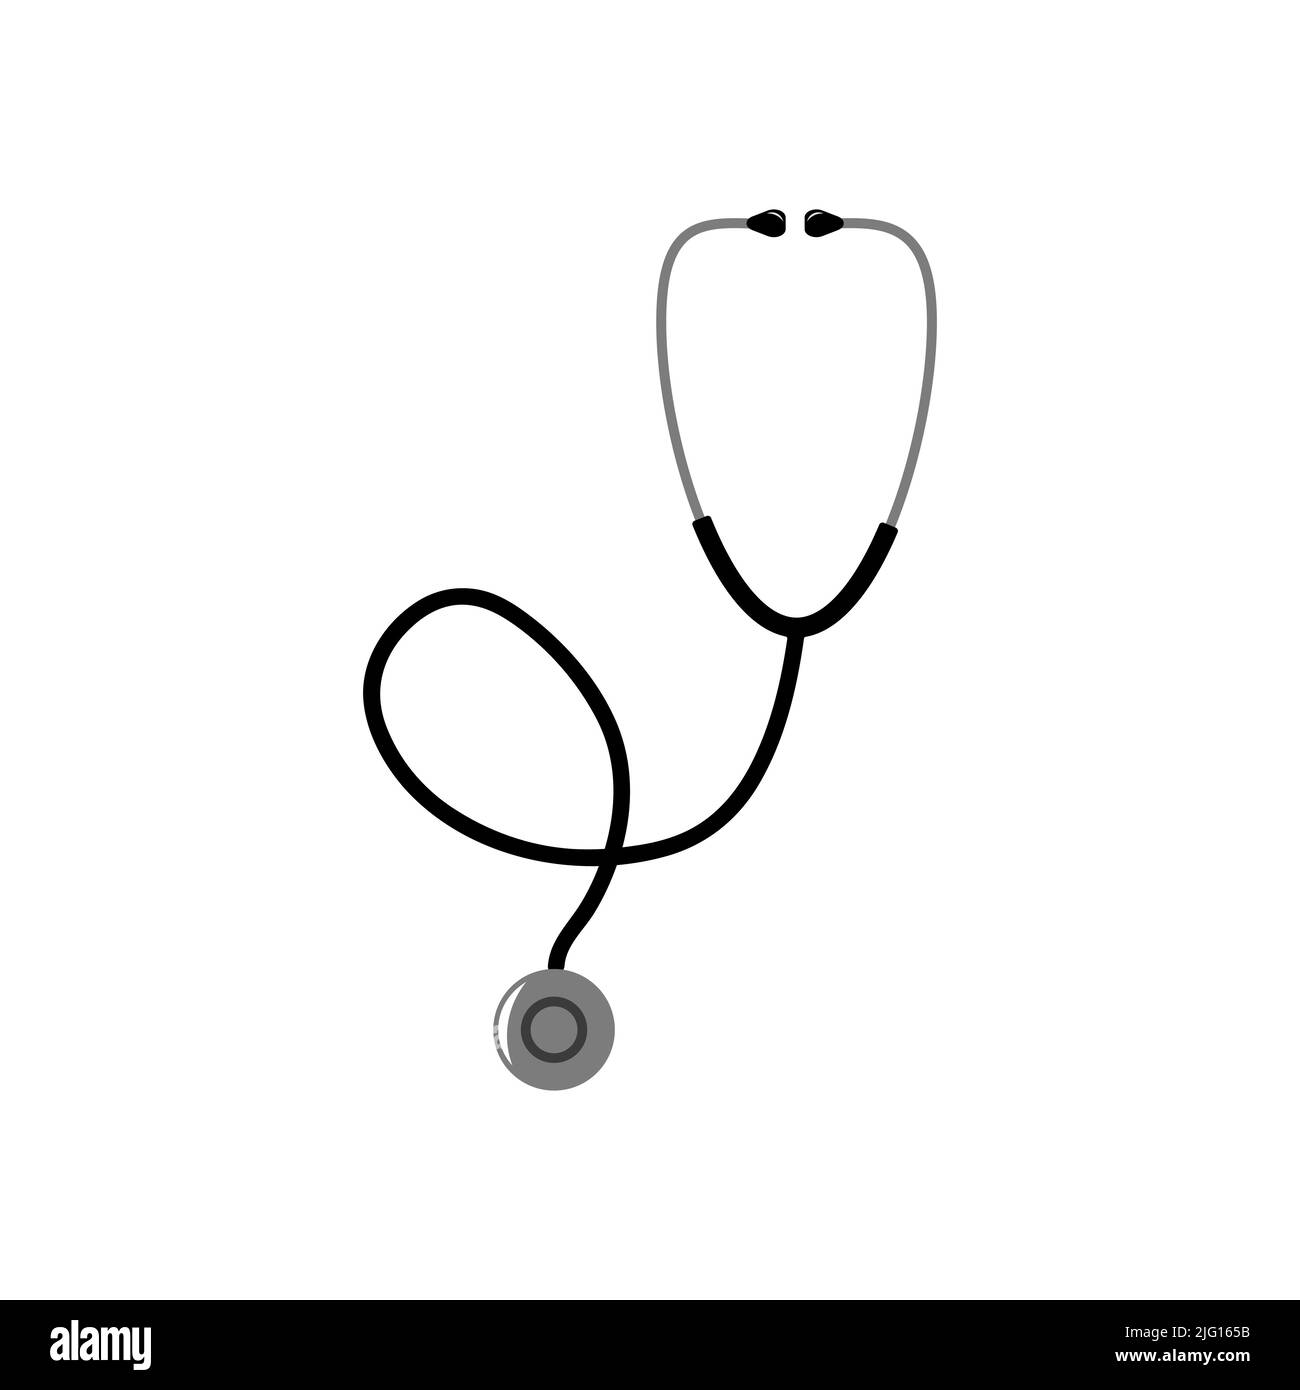 Stethoscope icon vector isolated on white background. Stethoscope icon Stock Vector